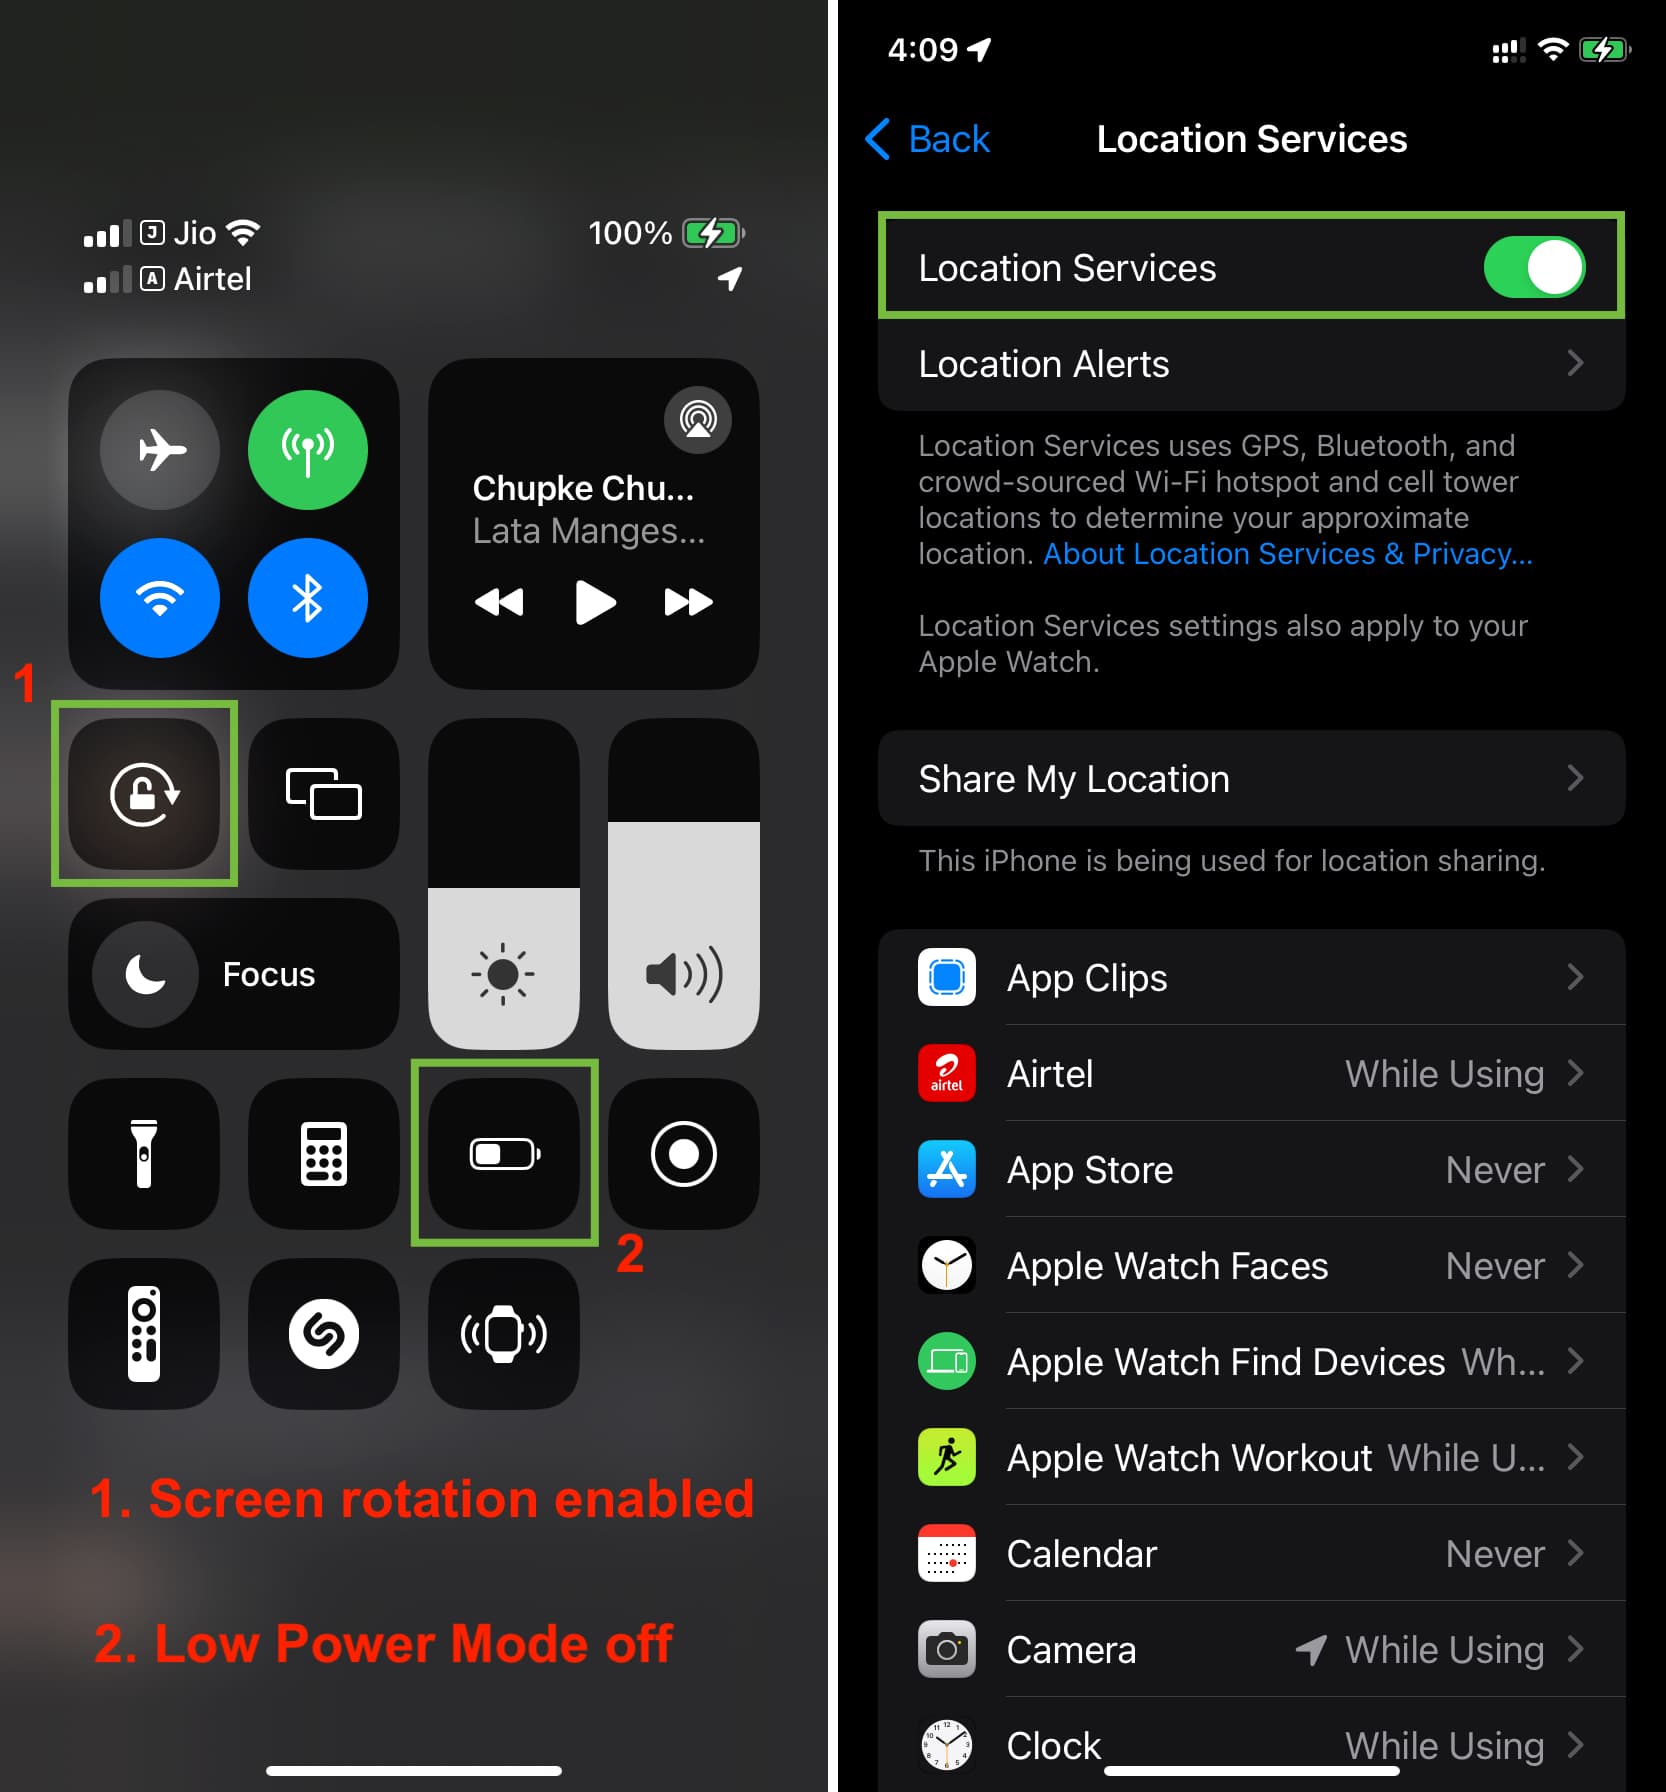 iPhone Low Power Mode off, screen rotation on, and location services enabled